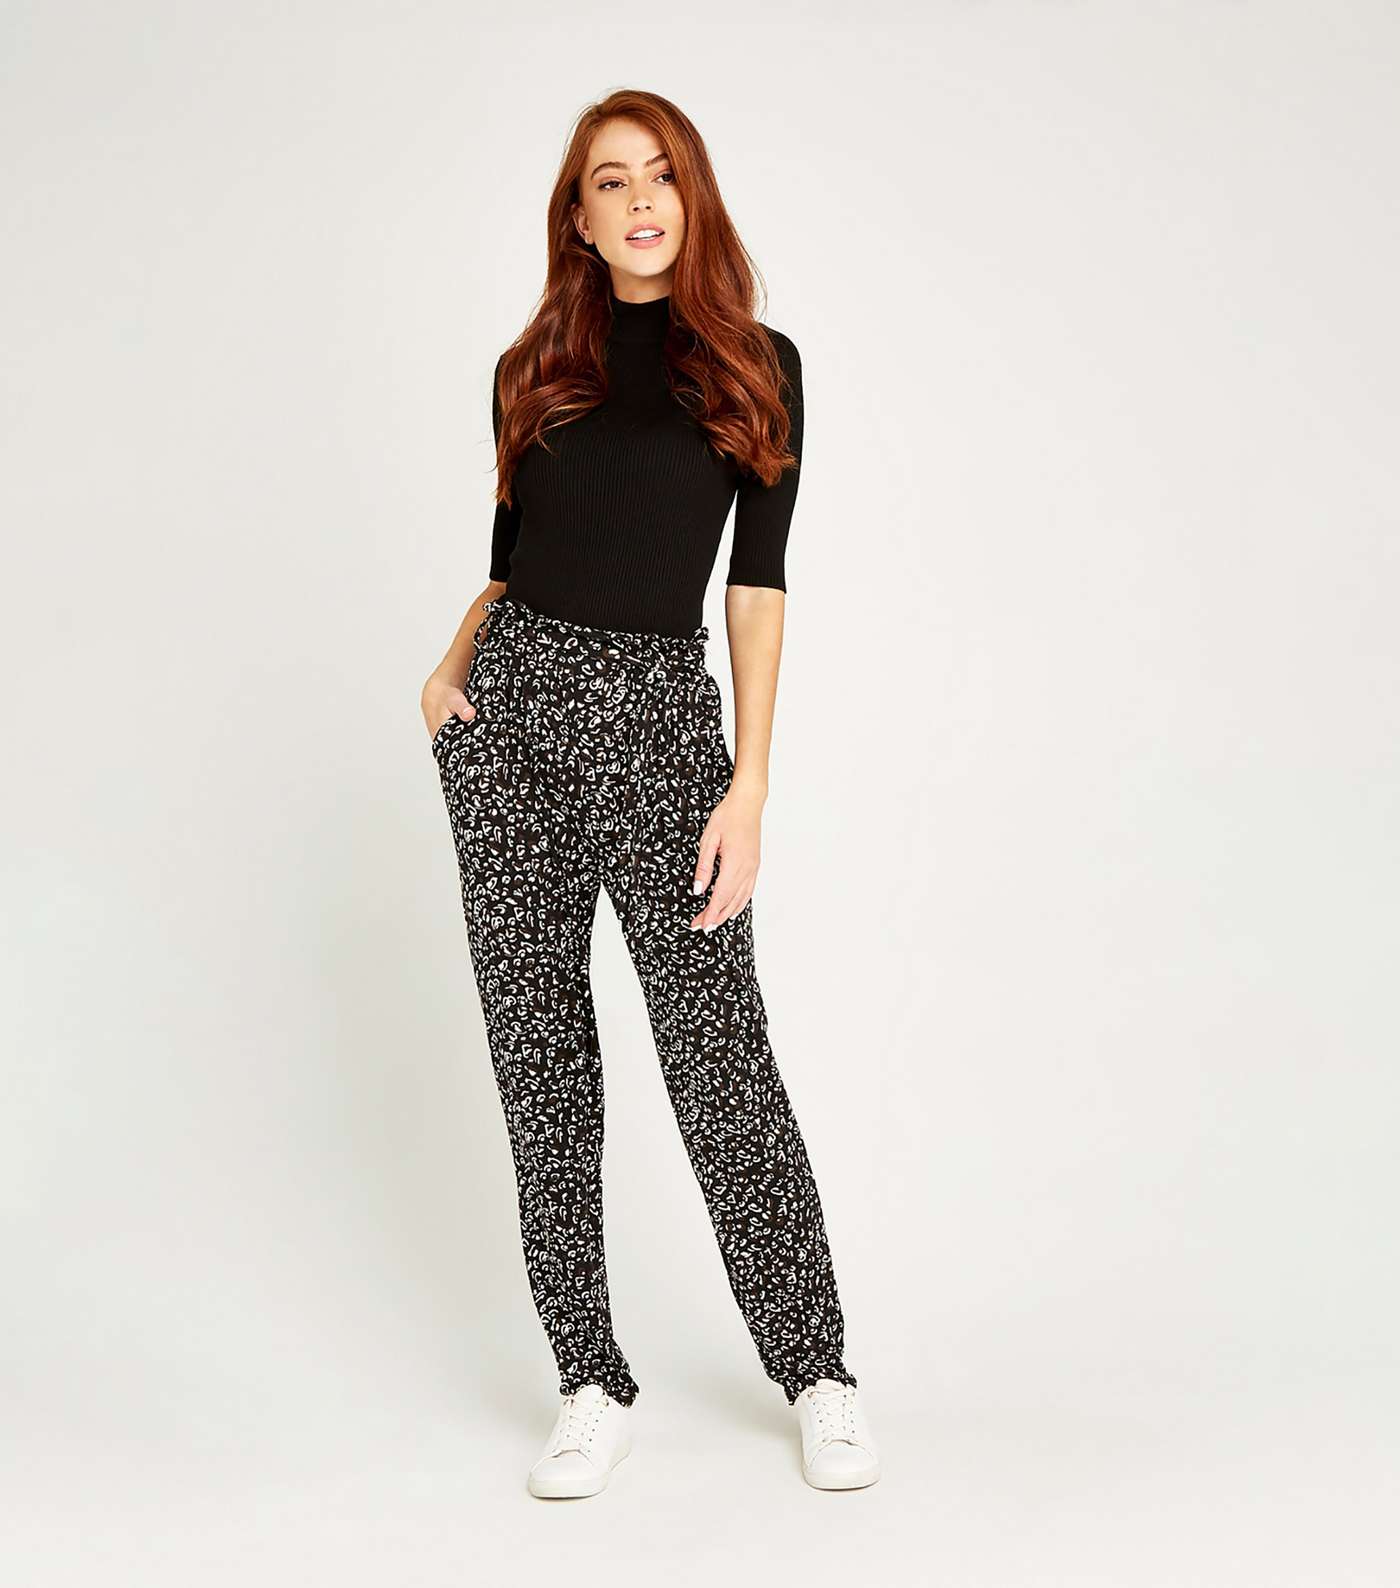 Apricot Brown Leopard Print Soft Touch Trousers Image 2